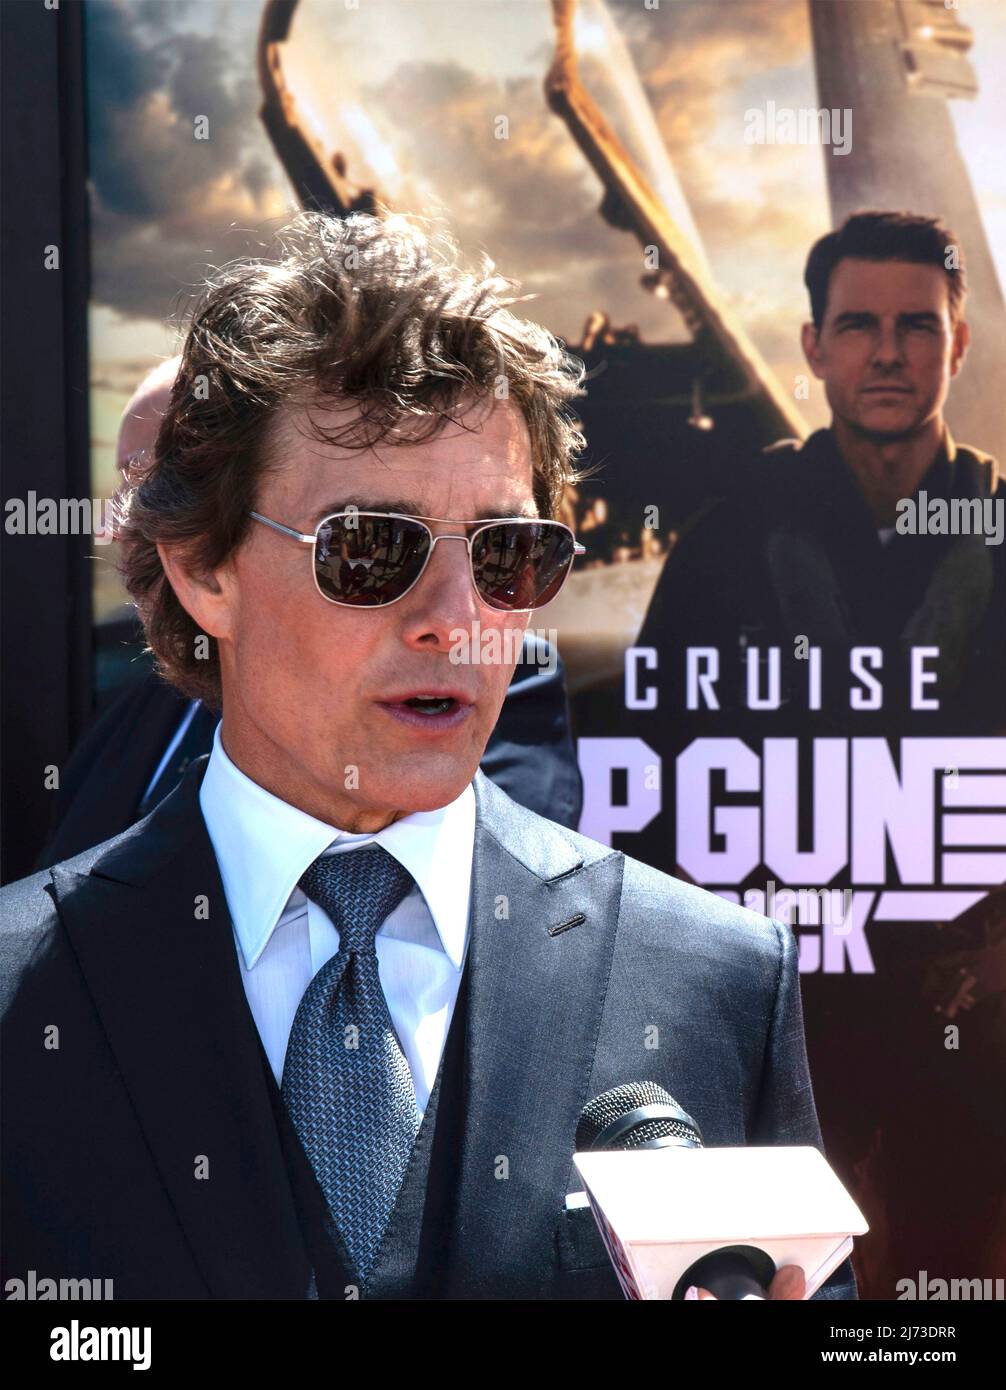 San Diego, United States. 04 May, 2022. American actor Tom Cruise walks the red carpet during the advance movie premiere of Top Gun: Maverick, at Naval Air Station North Island, May 4, 2022 in San Diego, California, Top Gun: Maverick, is the sequel to the 1986 blockbuster, Top Gun and will be released worldwide on May 27.  Credit: MC2 Keenan Daniels/US Navy/Alamy Live News Stock Photo